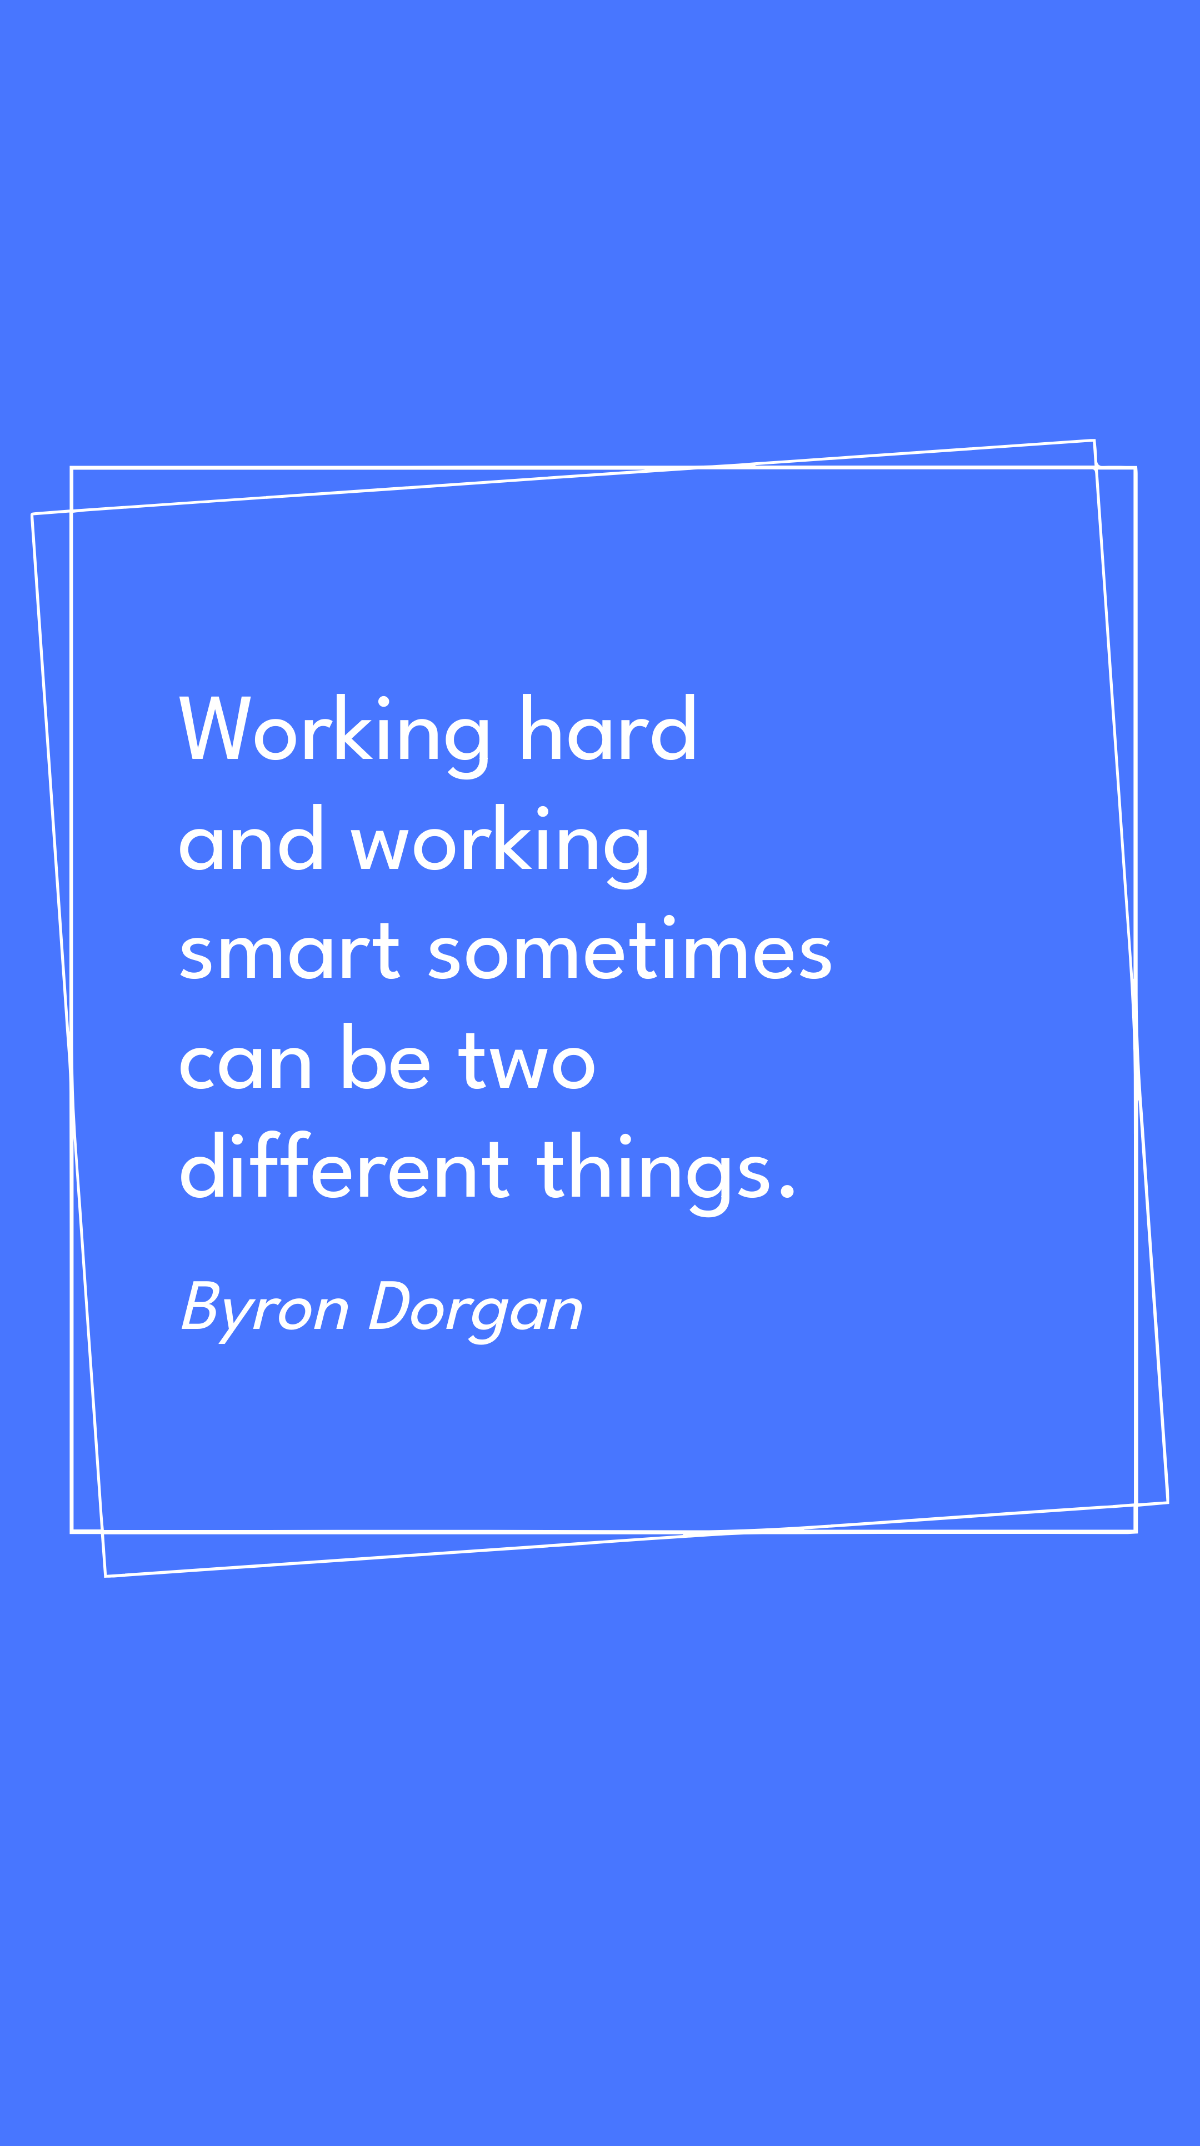 Byron Dorgan - Working hard and working smart sometimes can be two different things.